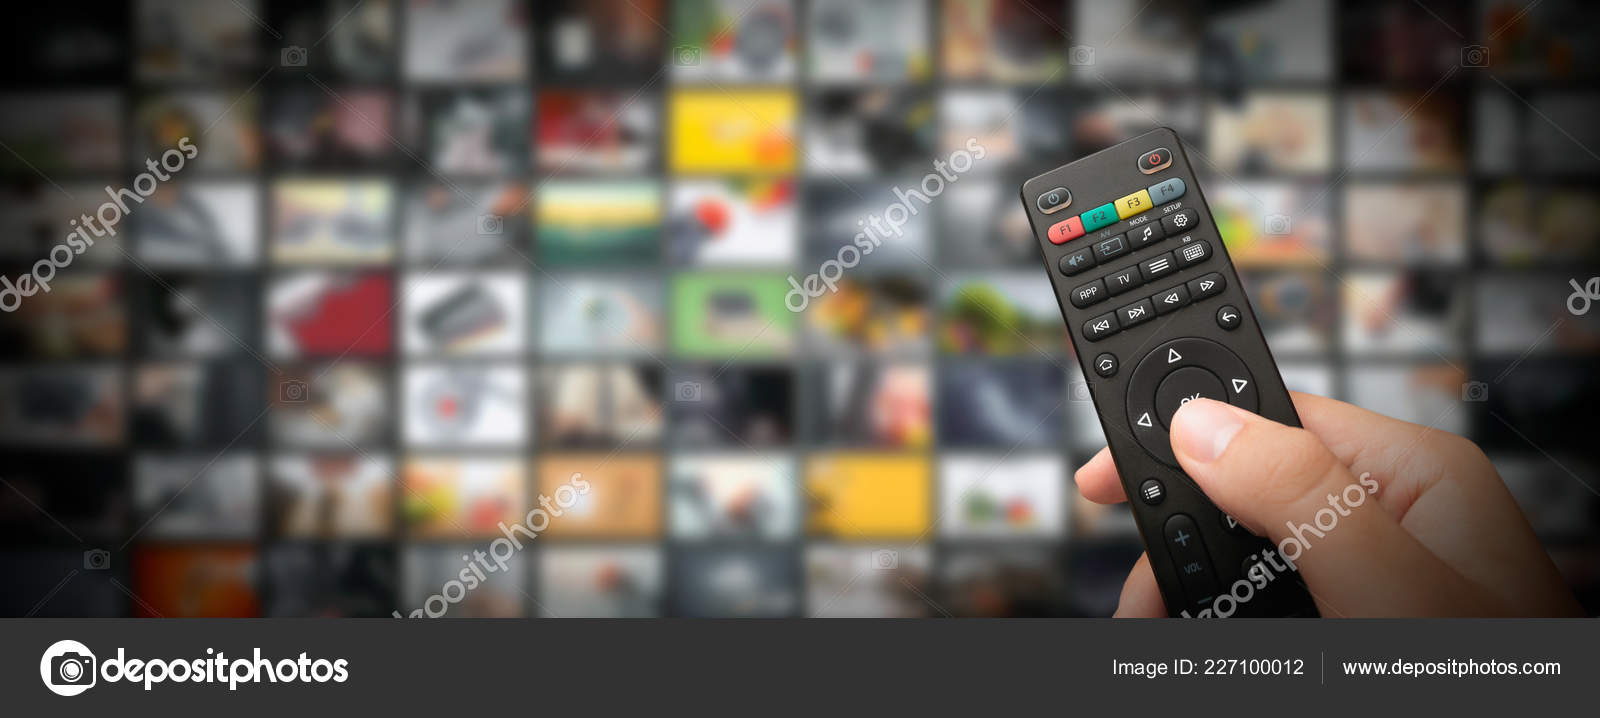 Television Streaming Video Concept Media Video Demand Technology Video Service Stock Photo by ©simpson33 227100012